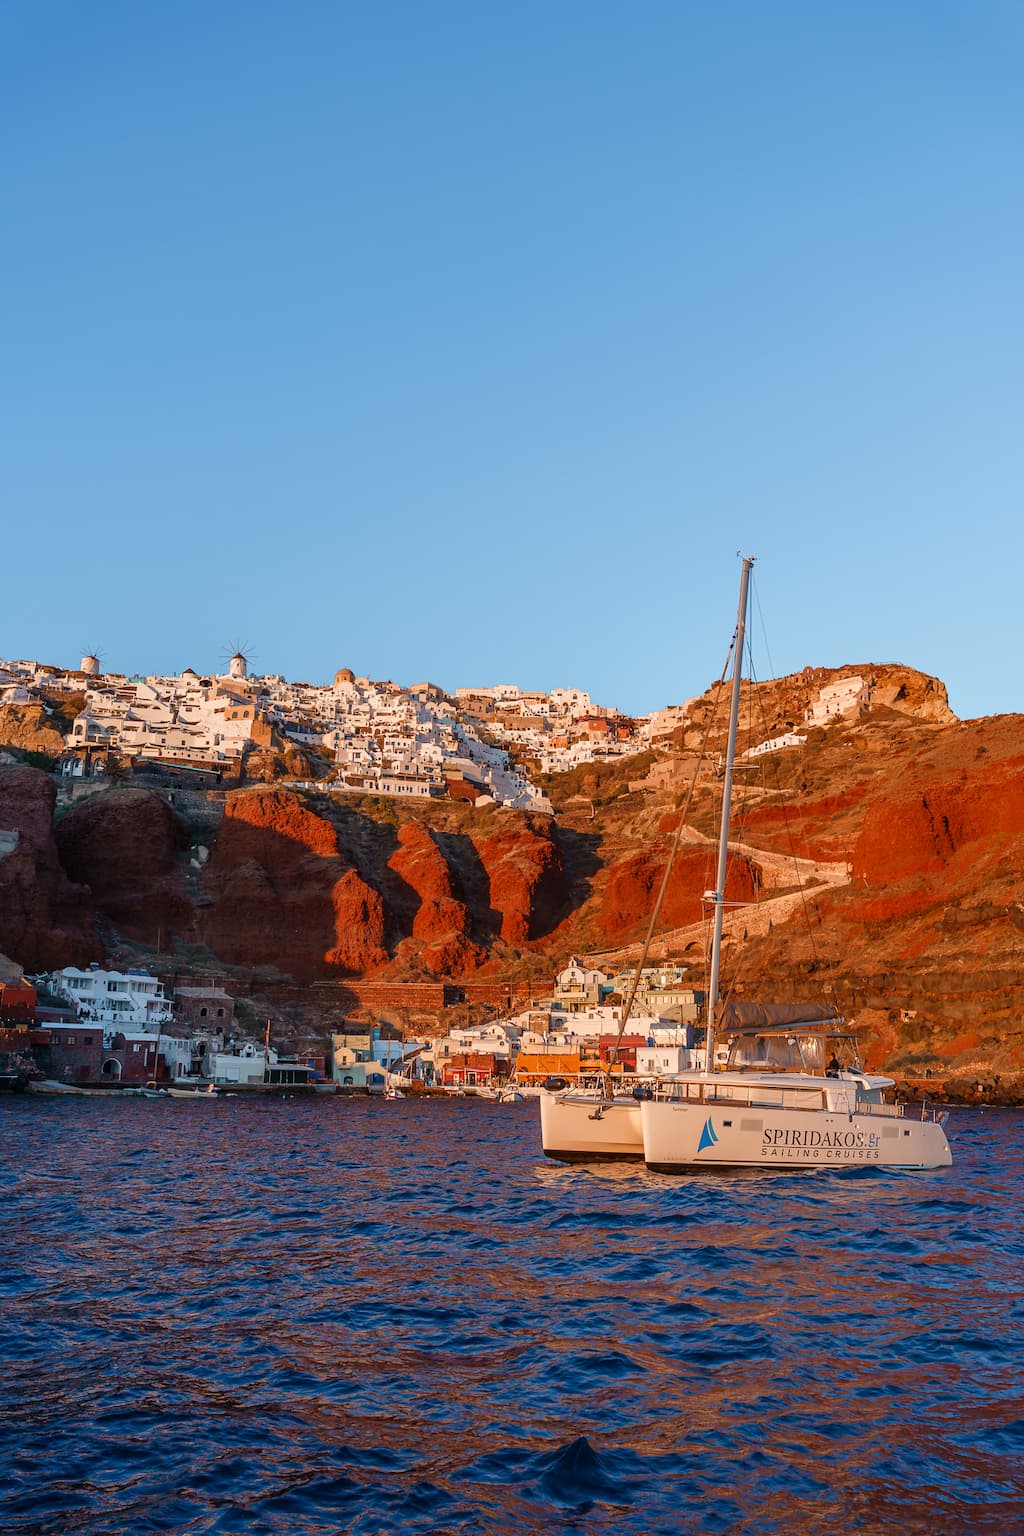 Best sunset cruises in Santorini end in Amoudi Bay to watch the famed Santorini sunset.